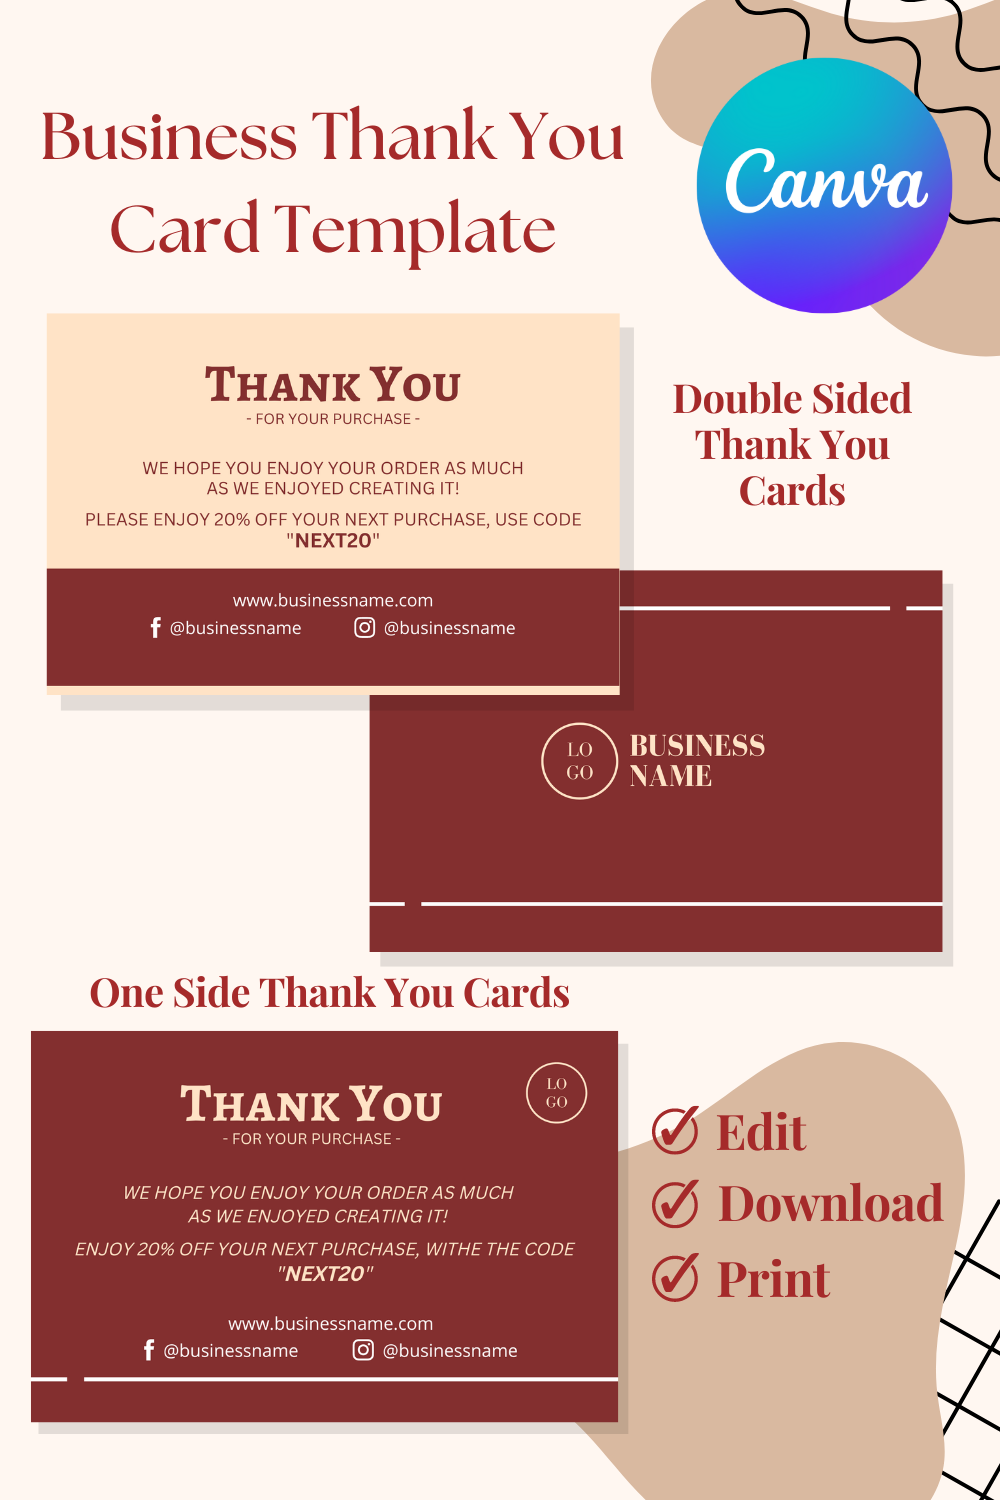 Thank You Card Printable Business Template pinterest image.